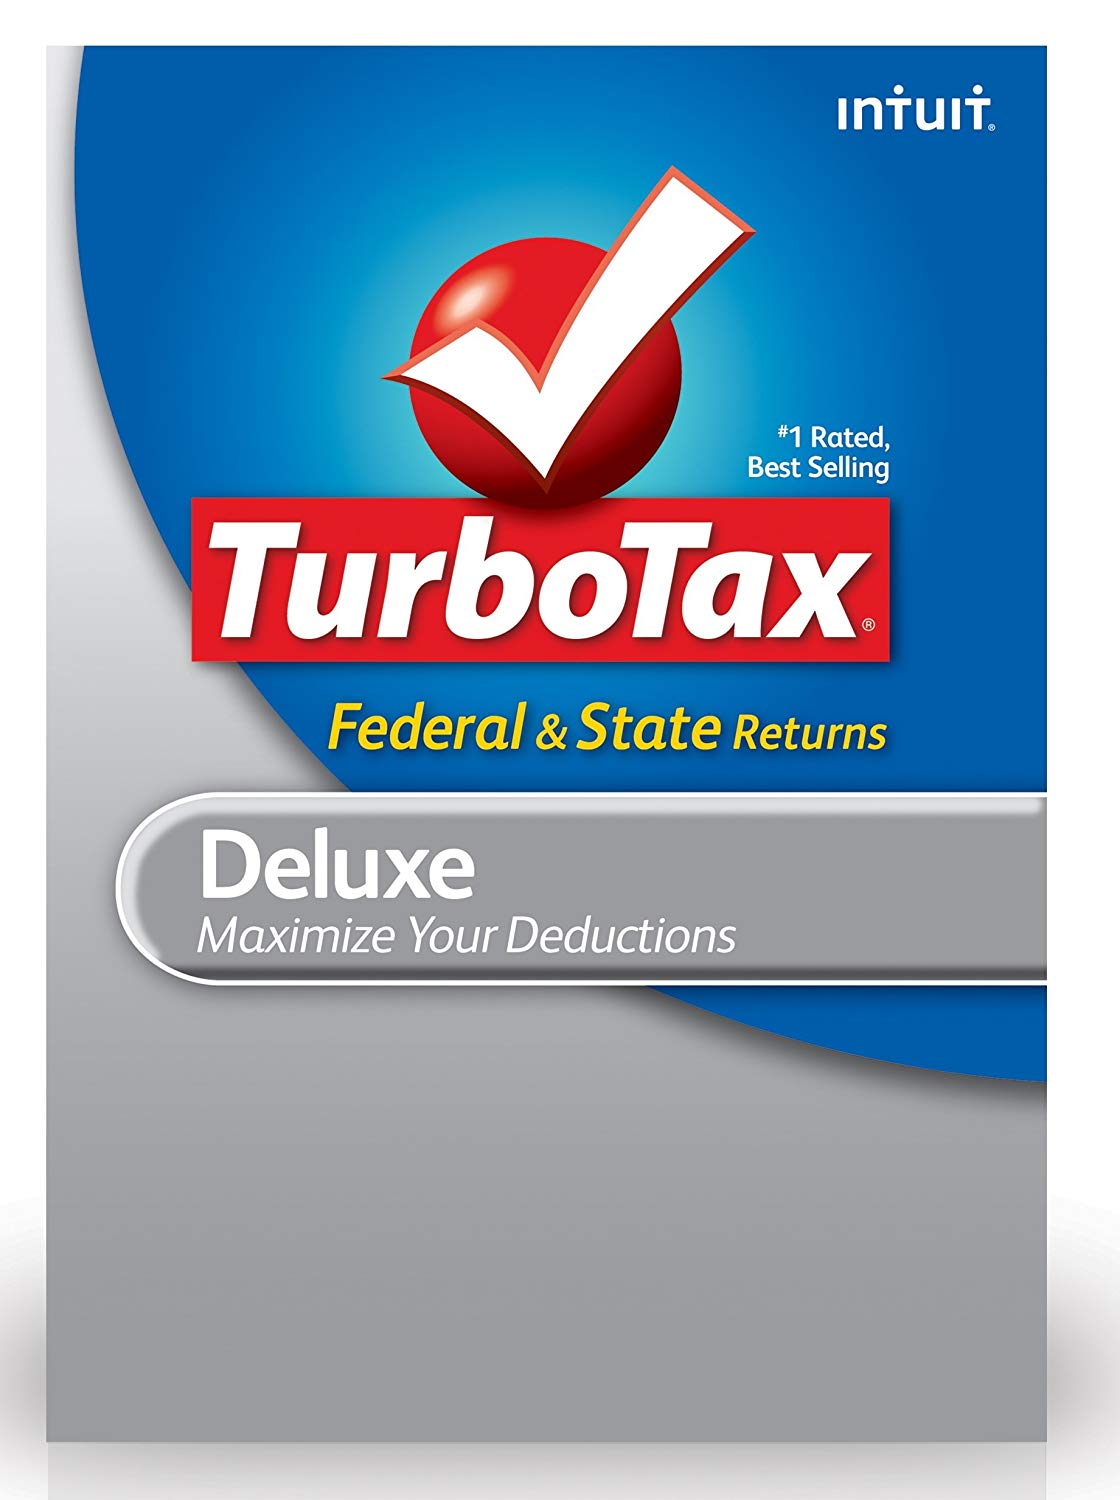 telephone number for turbotax help